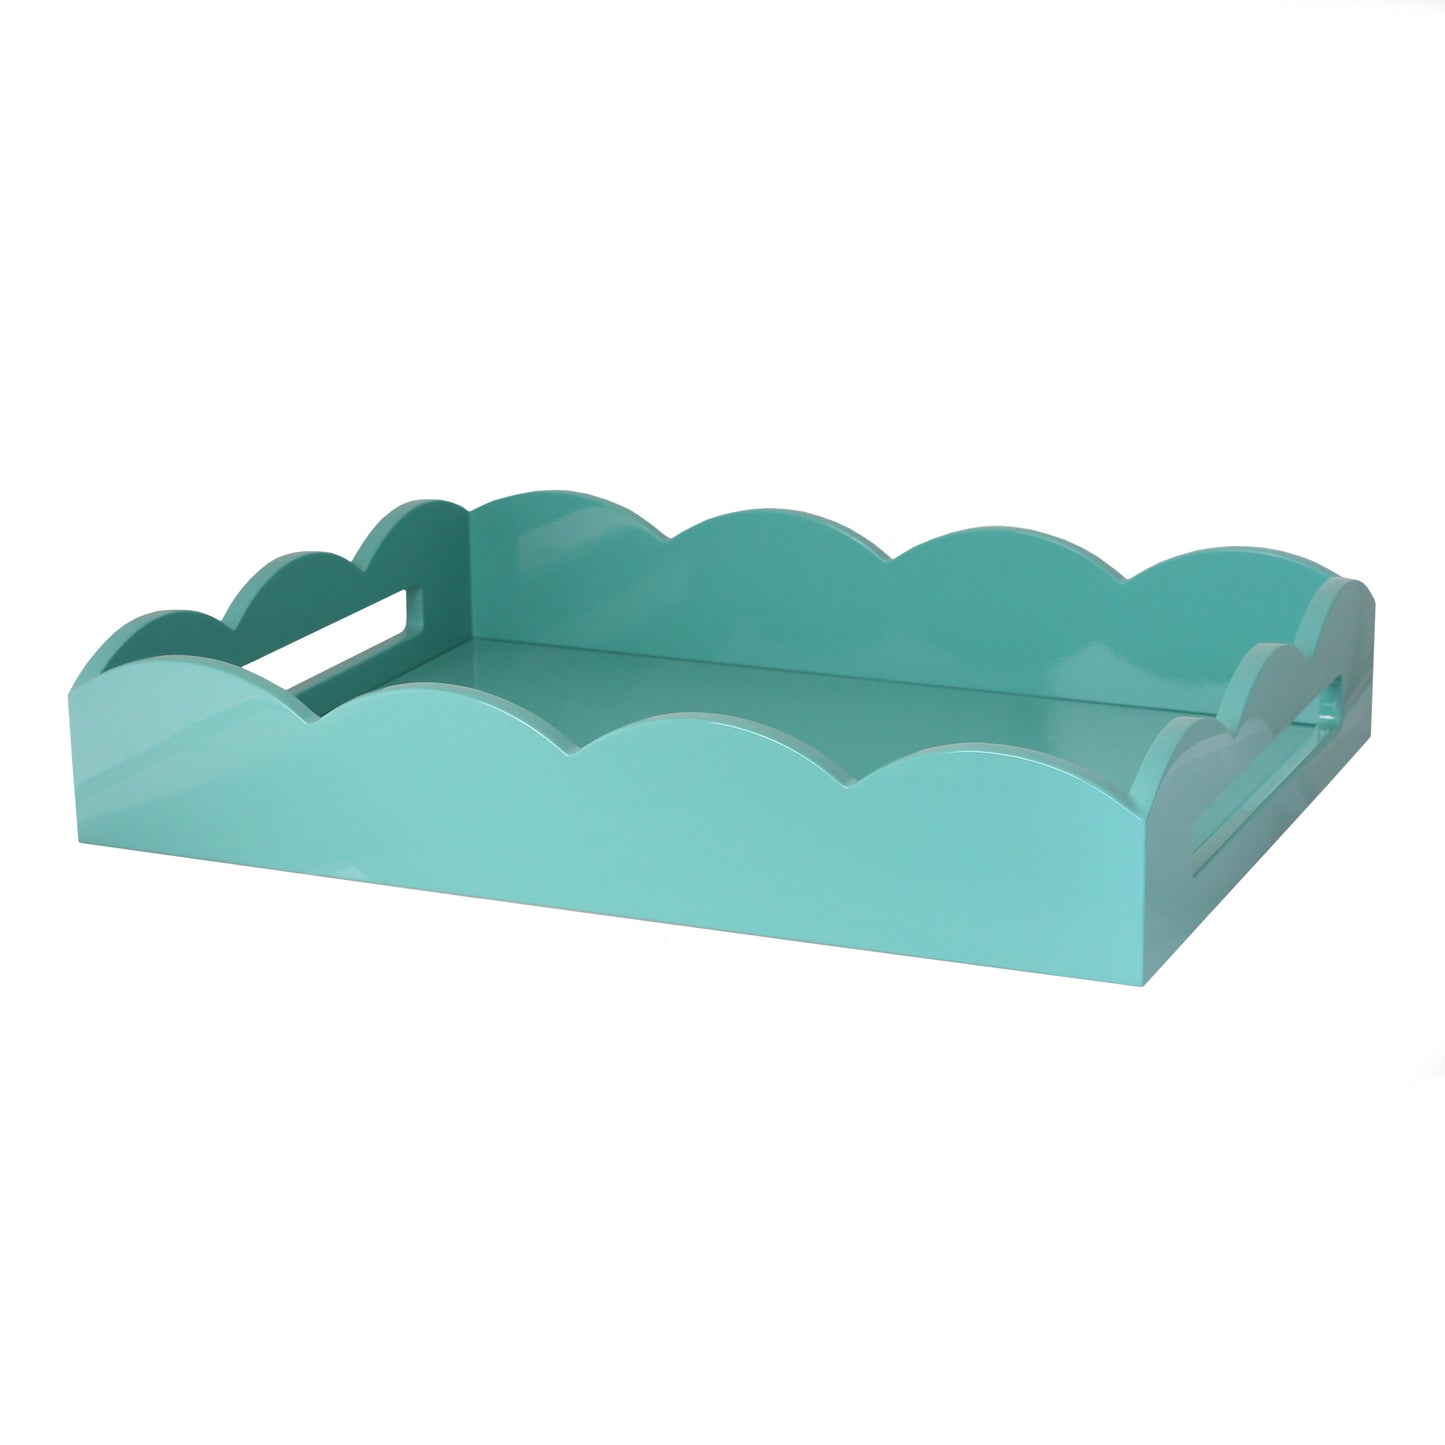 Turquoise blue lacquer tray with a scalloped edge